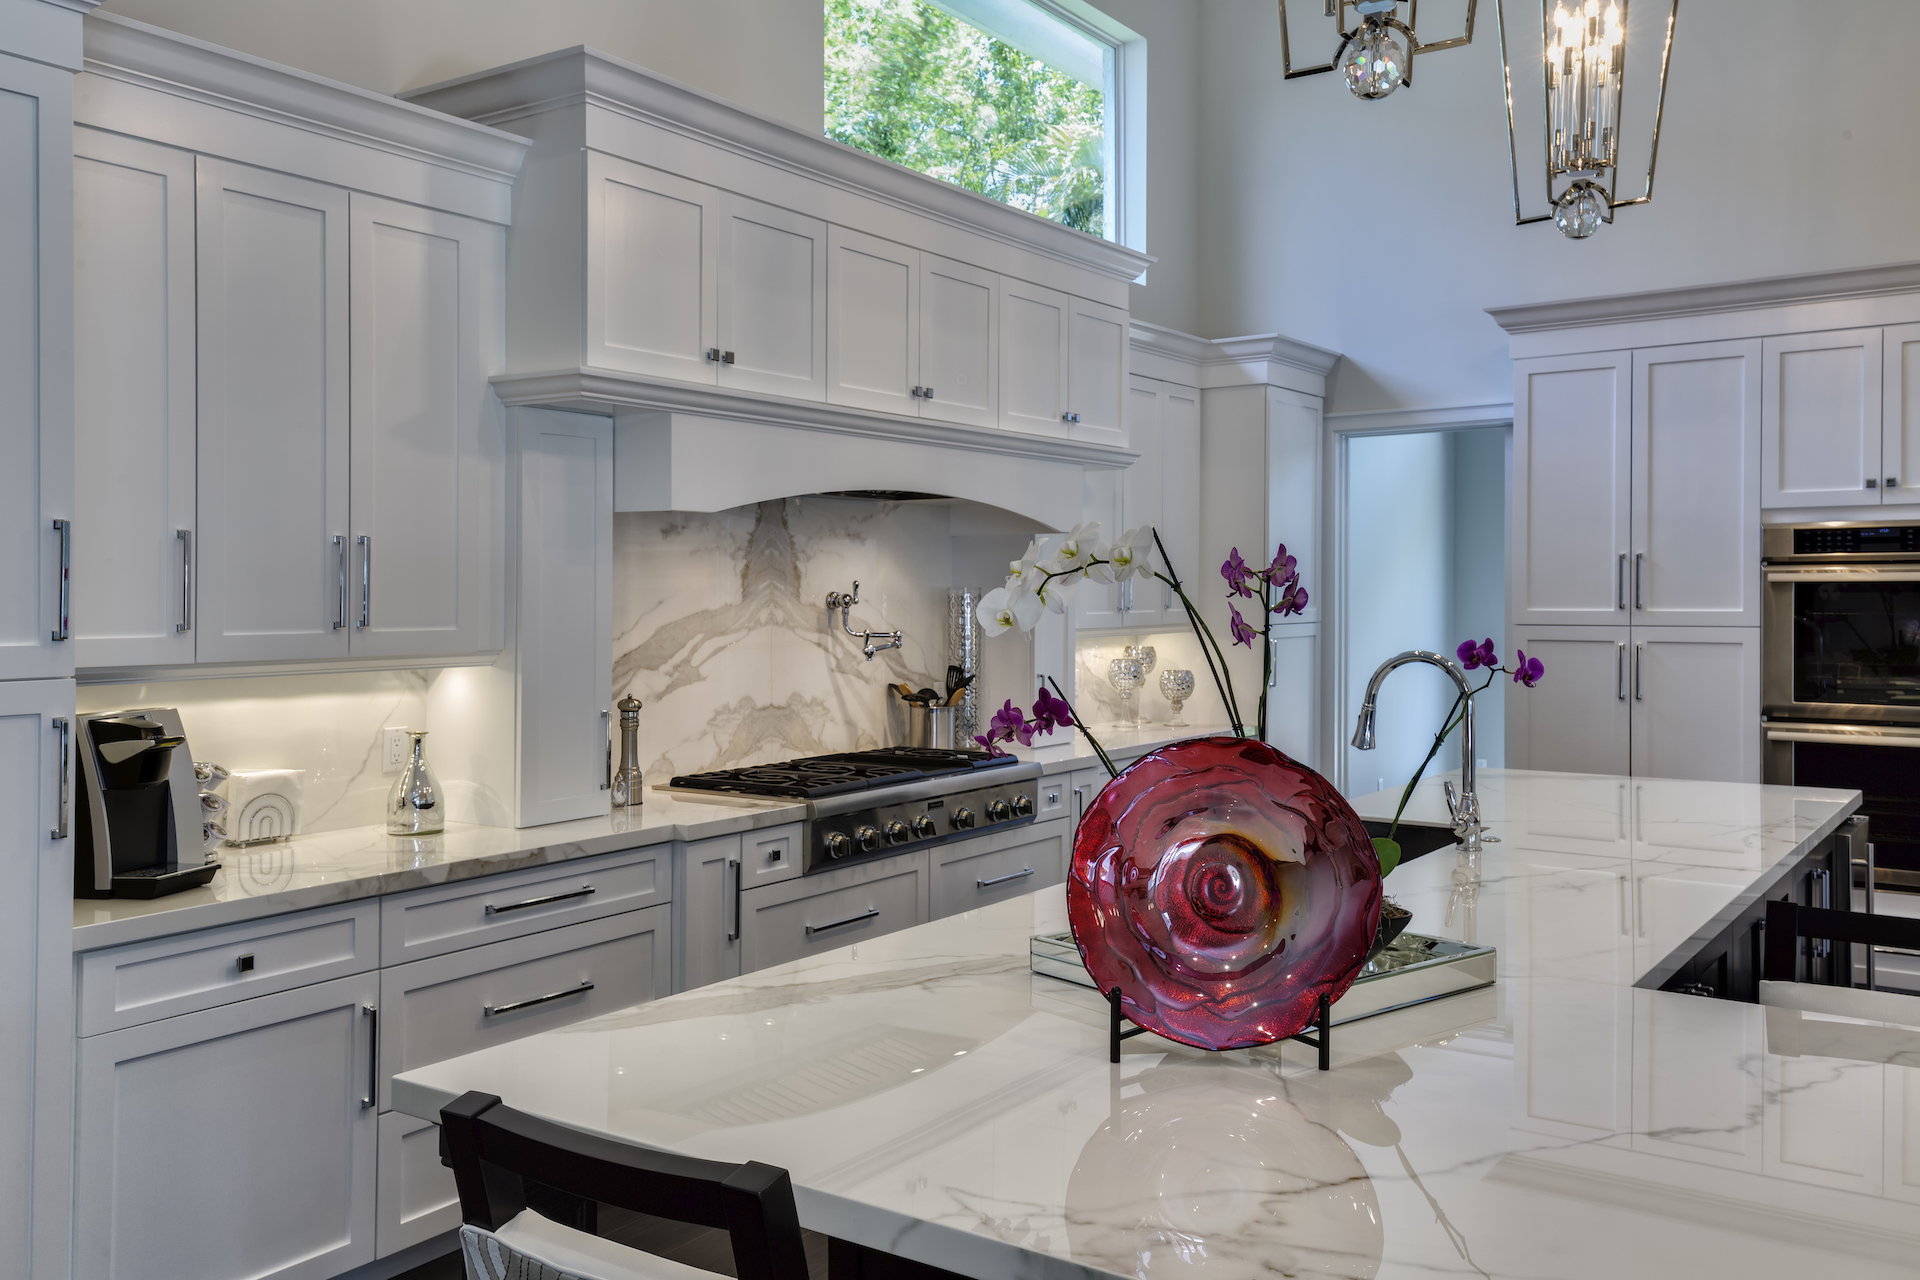 Neolith Countertops Brings Drama To A Florida Kitchen Products